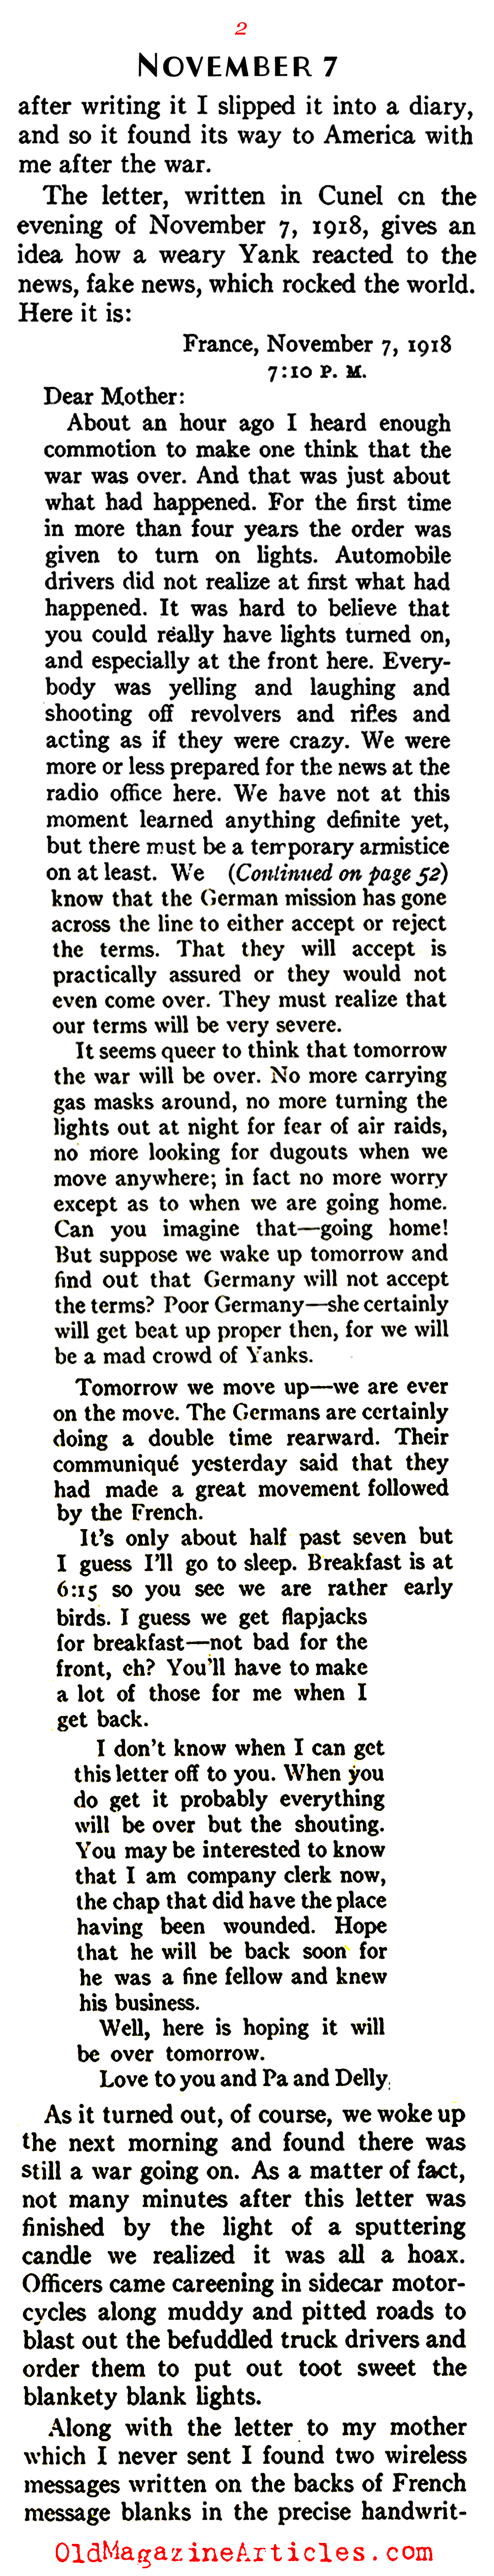 The German Peace Delegation Crosses the Lines (American Legion Monthly, 1938)